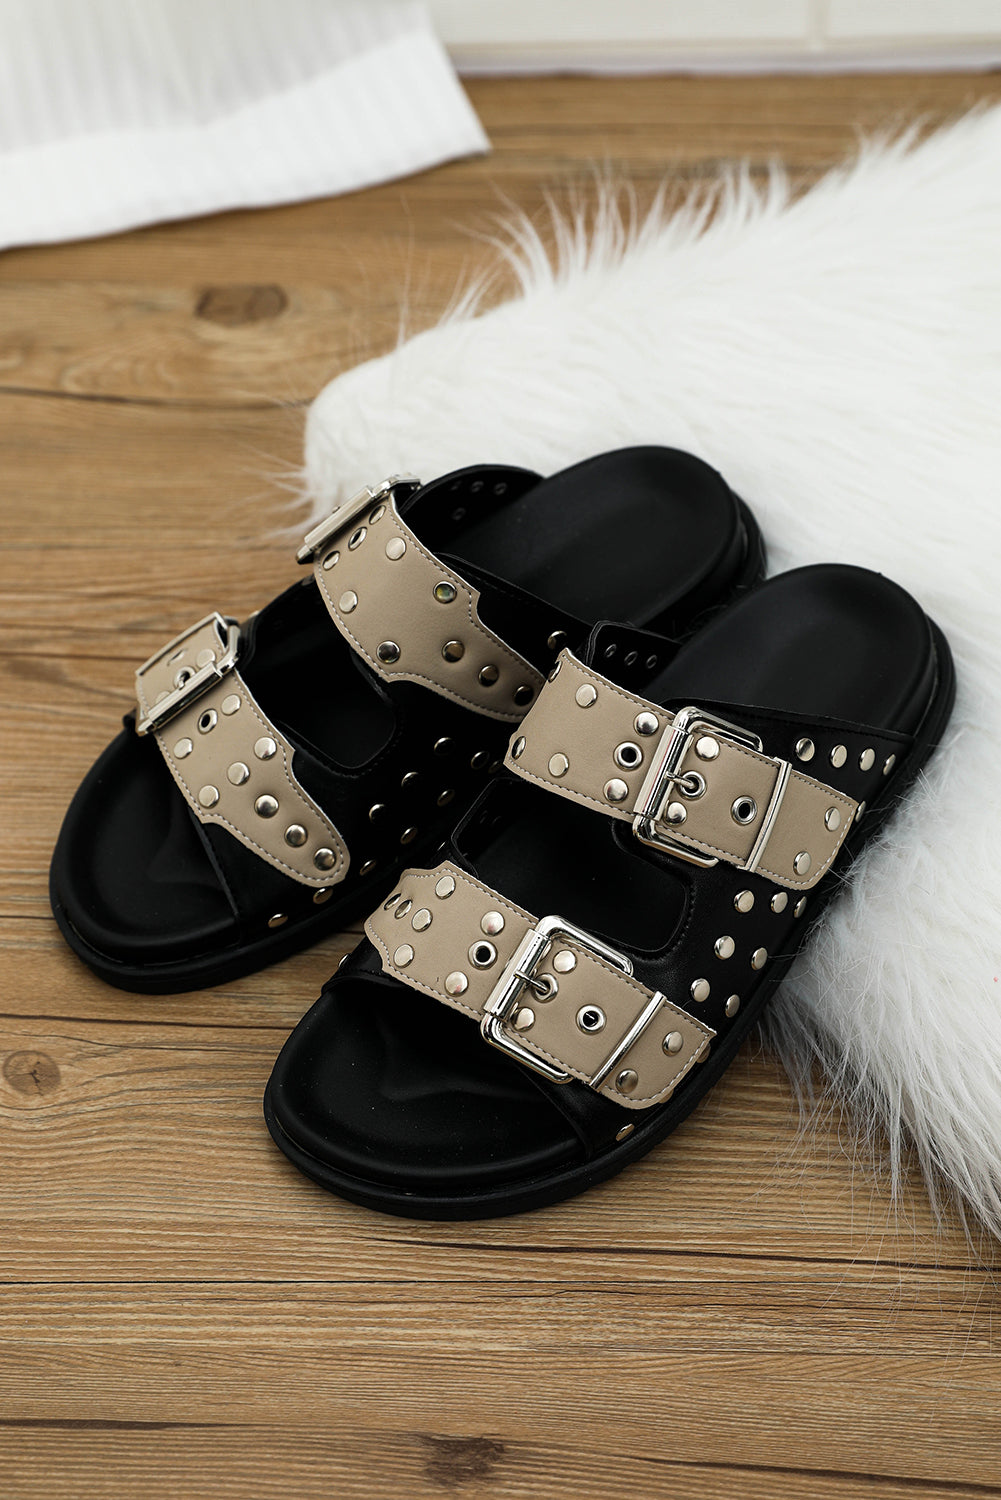 Black Retro Buckle Rivet Detail 2-tone Patched Slippers Slippers JT's Designer Fashion